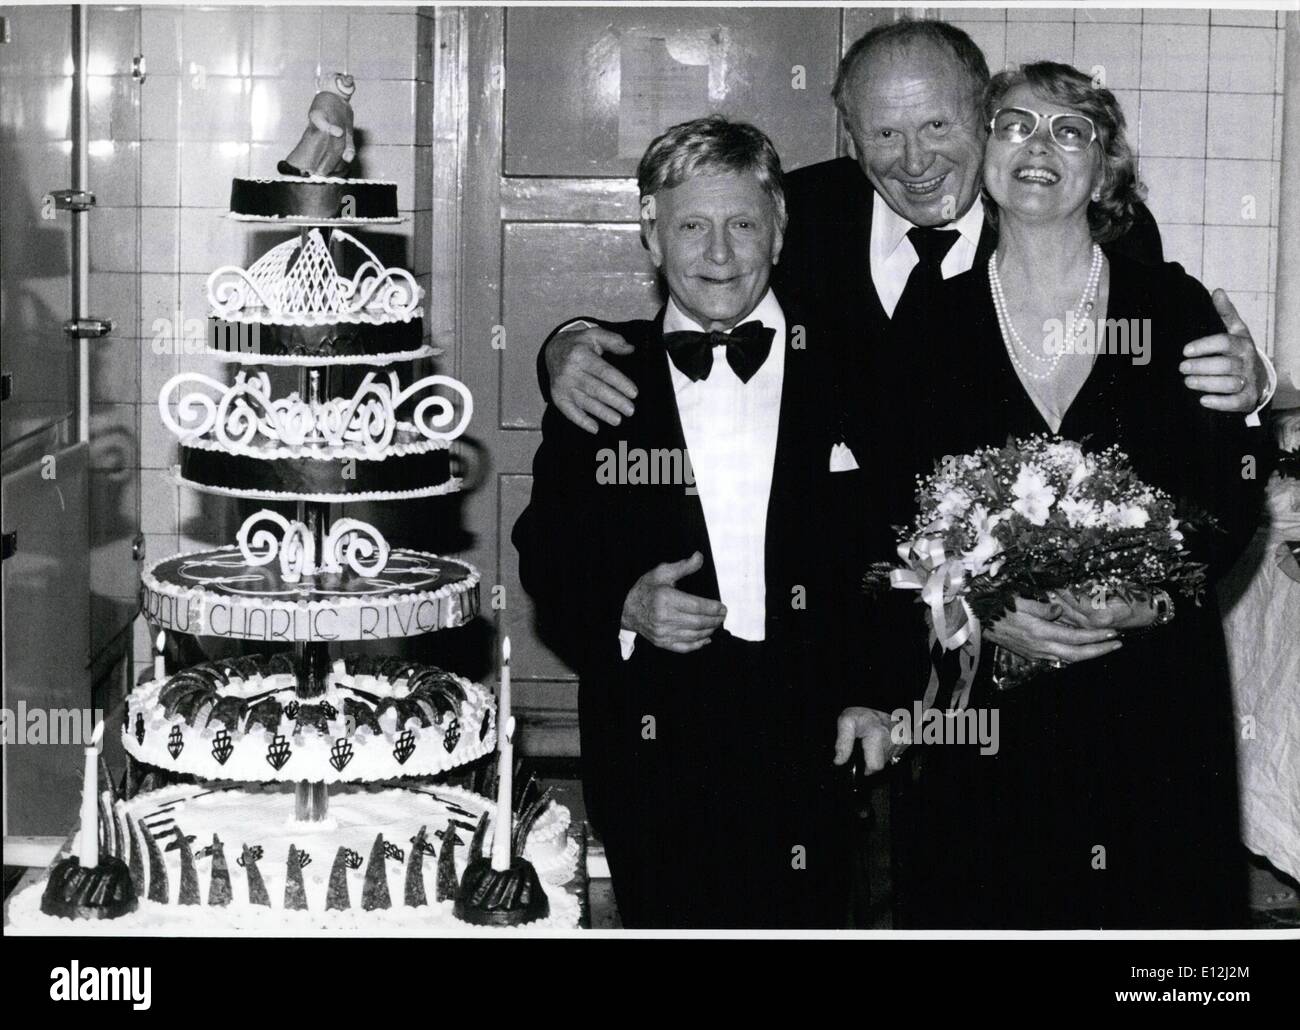 Jan. 09, 2012 - In Munich Charlie Rivel Celebrated His Birthday - And His Engagement: A special date was April 24th, 1978 for Charlie Rivel; the date of his 82nd birthday and his engagement The bride elect, the greatest clown of the world wants to marry (somewhere in Spain) as soon as possible, is Luise Katharina Thomalla,, 52-year-old and the sister-in-law of the German actor Georg Thomalla. charlie knew her since years, lost sight of her and now - found her for ever Charlie Rivel and his bride are happy, - but many will be sad, e.g Stock Photo